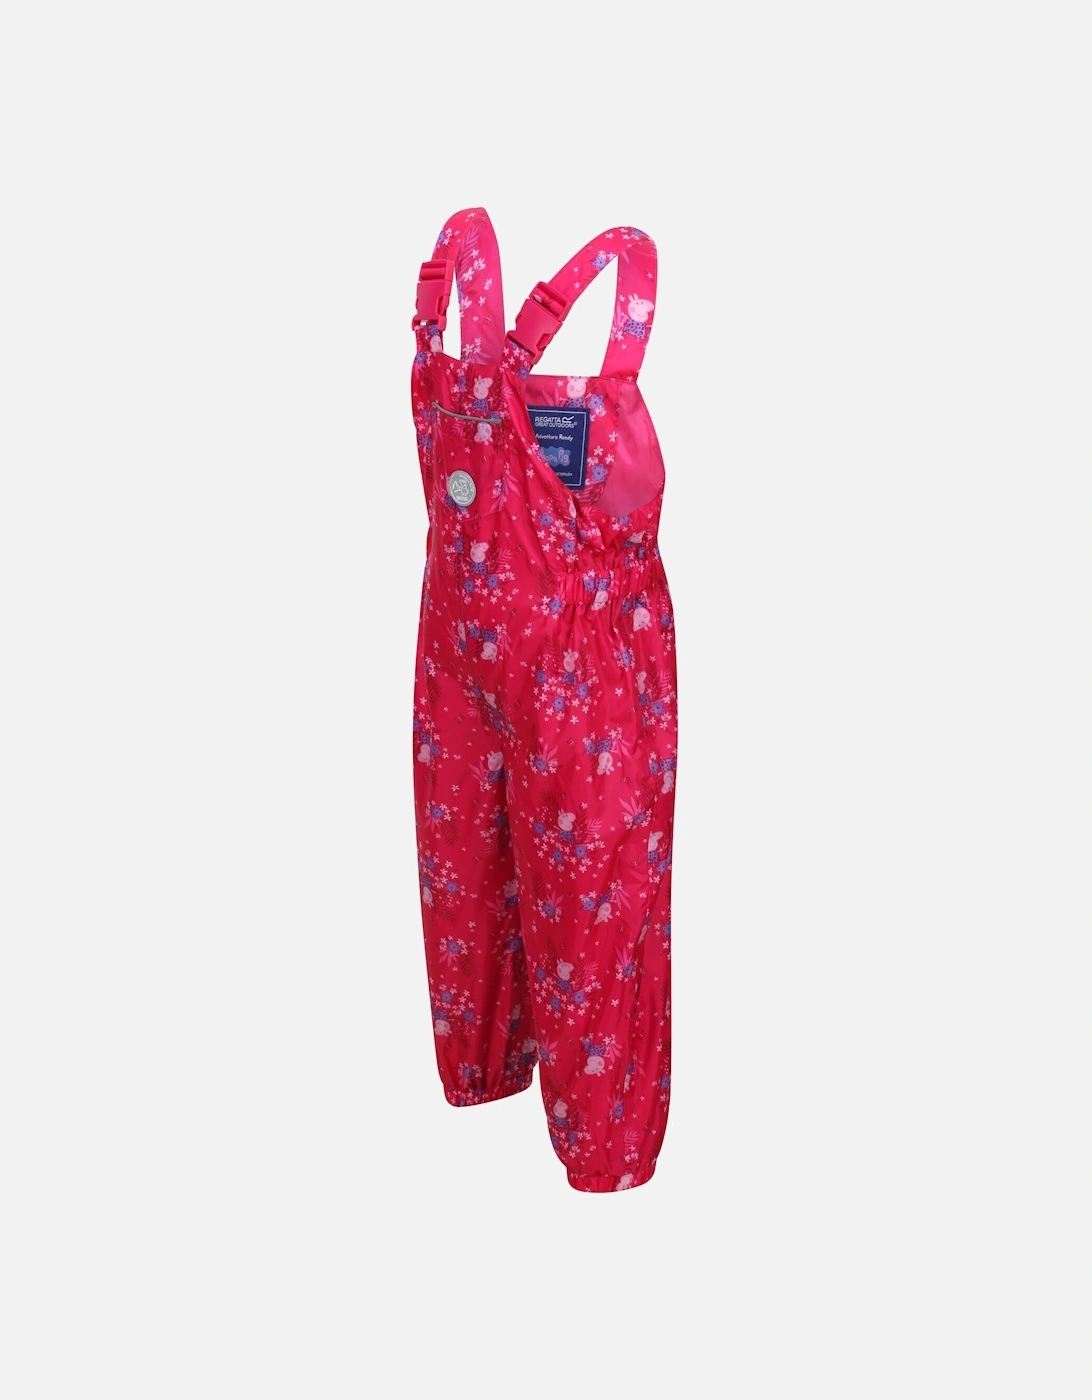 Childrens/Kids Muddy Puddle Peppa Pig Floral Dungarees